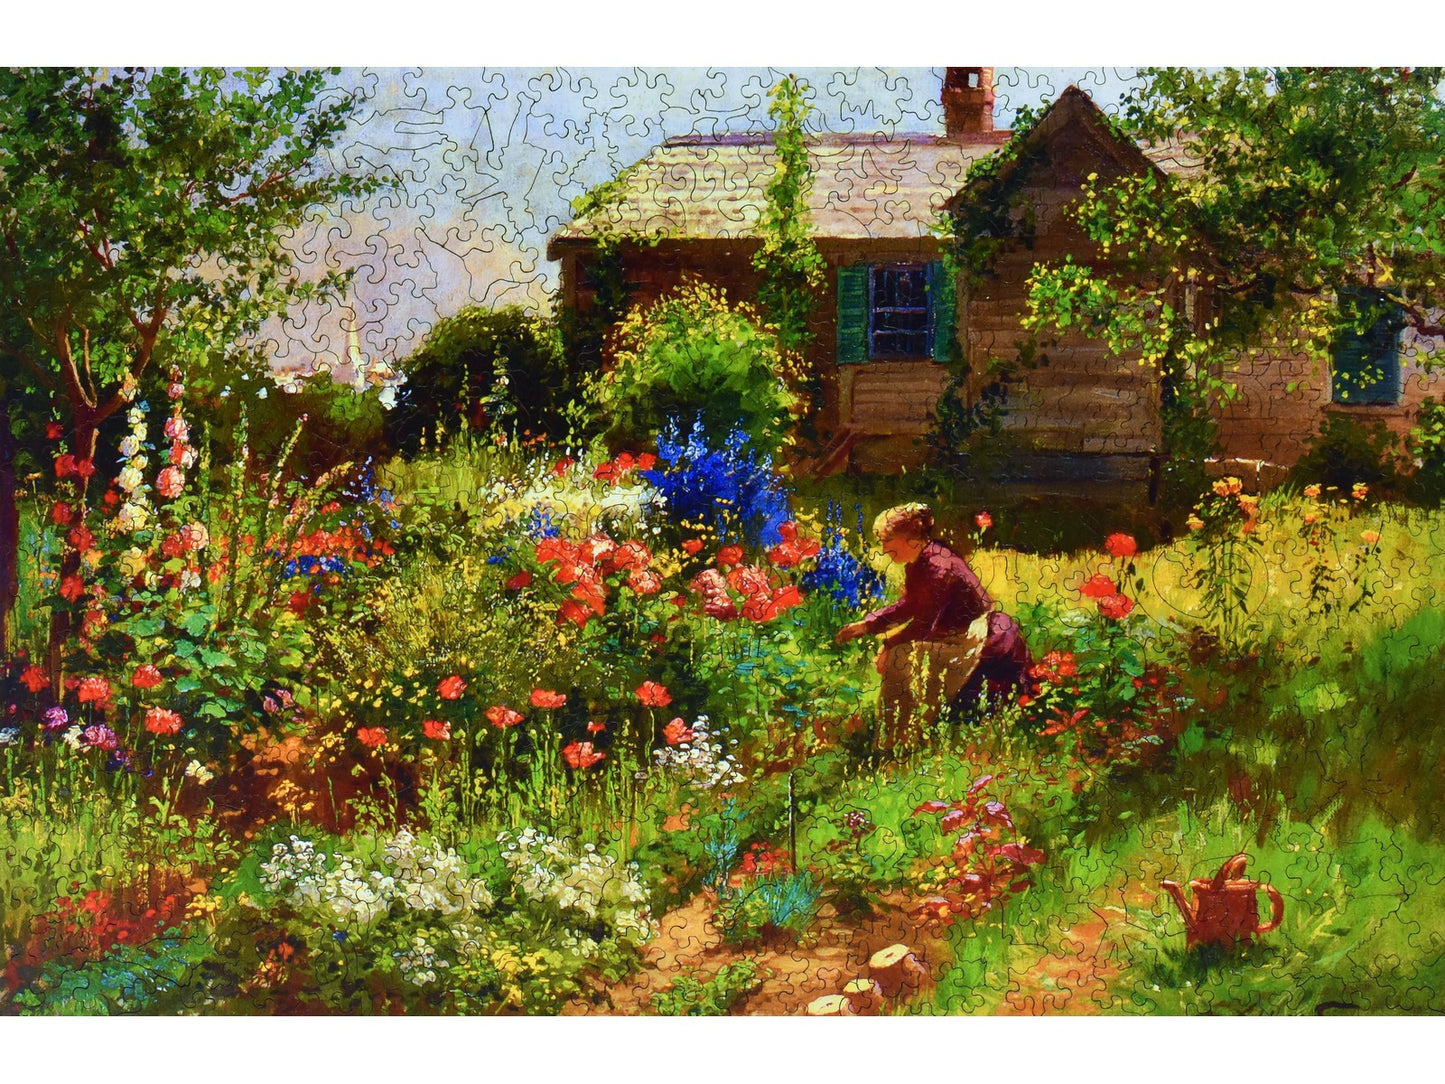 The front of the puzzle, Near Kennebunkport, which shows a country cottage with a large flower garden.